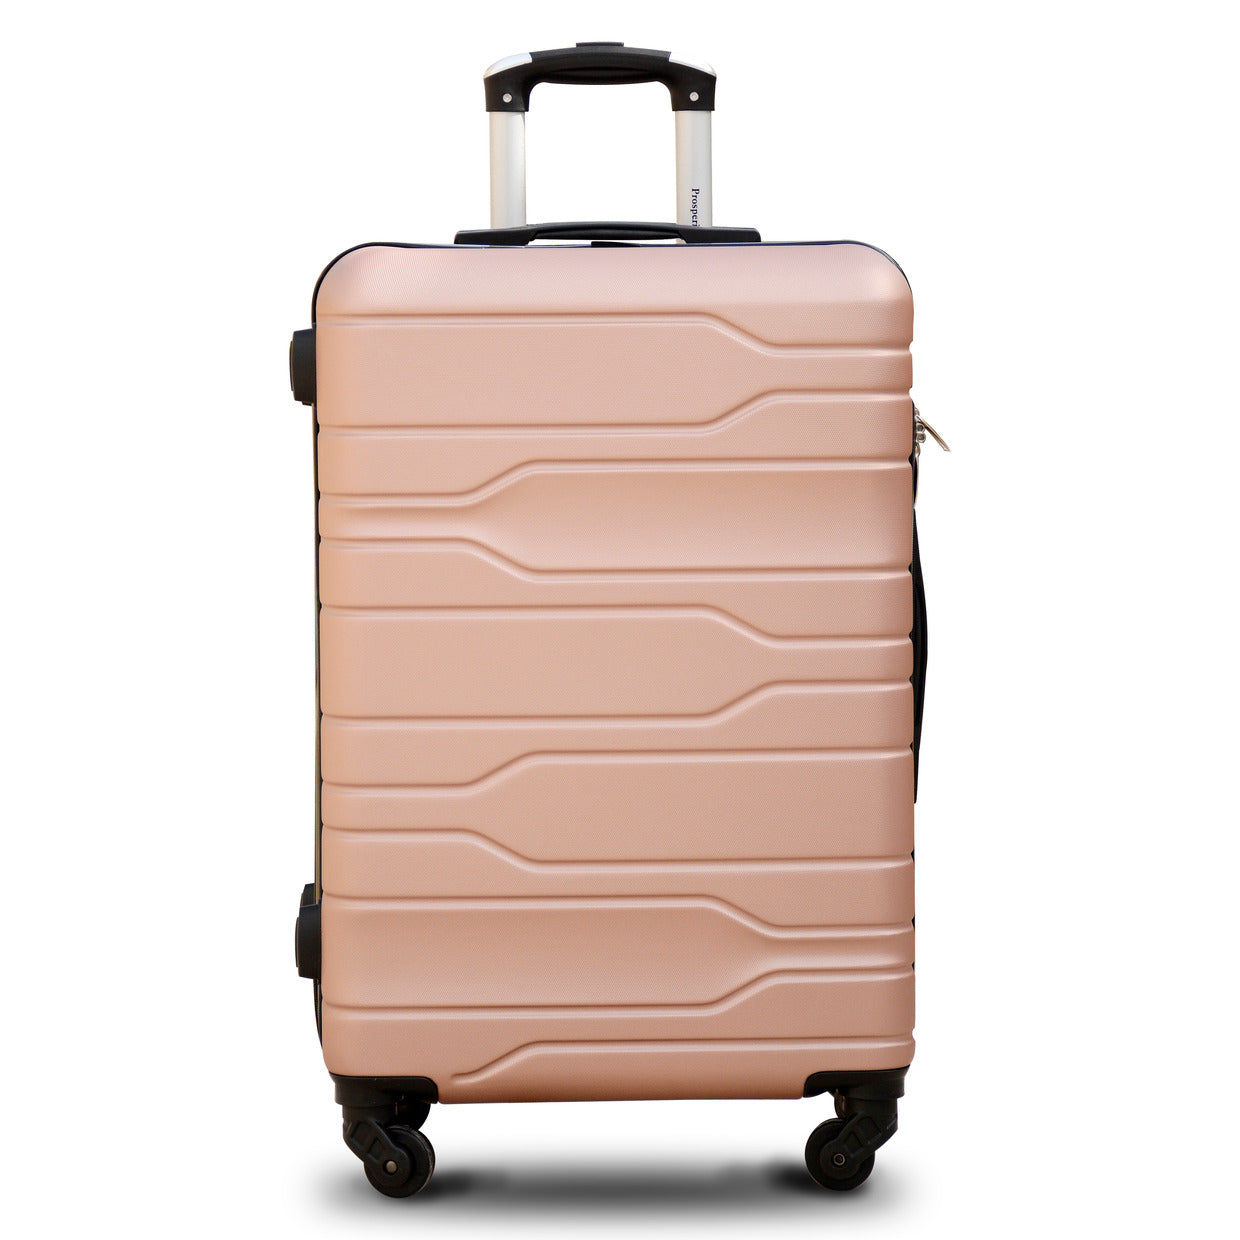 3 Pcs Full Set 20” 24” 28 Inches Rose Gold Colour Prosperity ABS Lightweight Luggage Bag  With Spinner Wheel